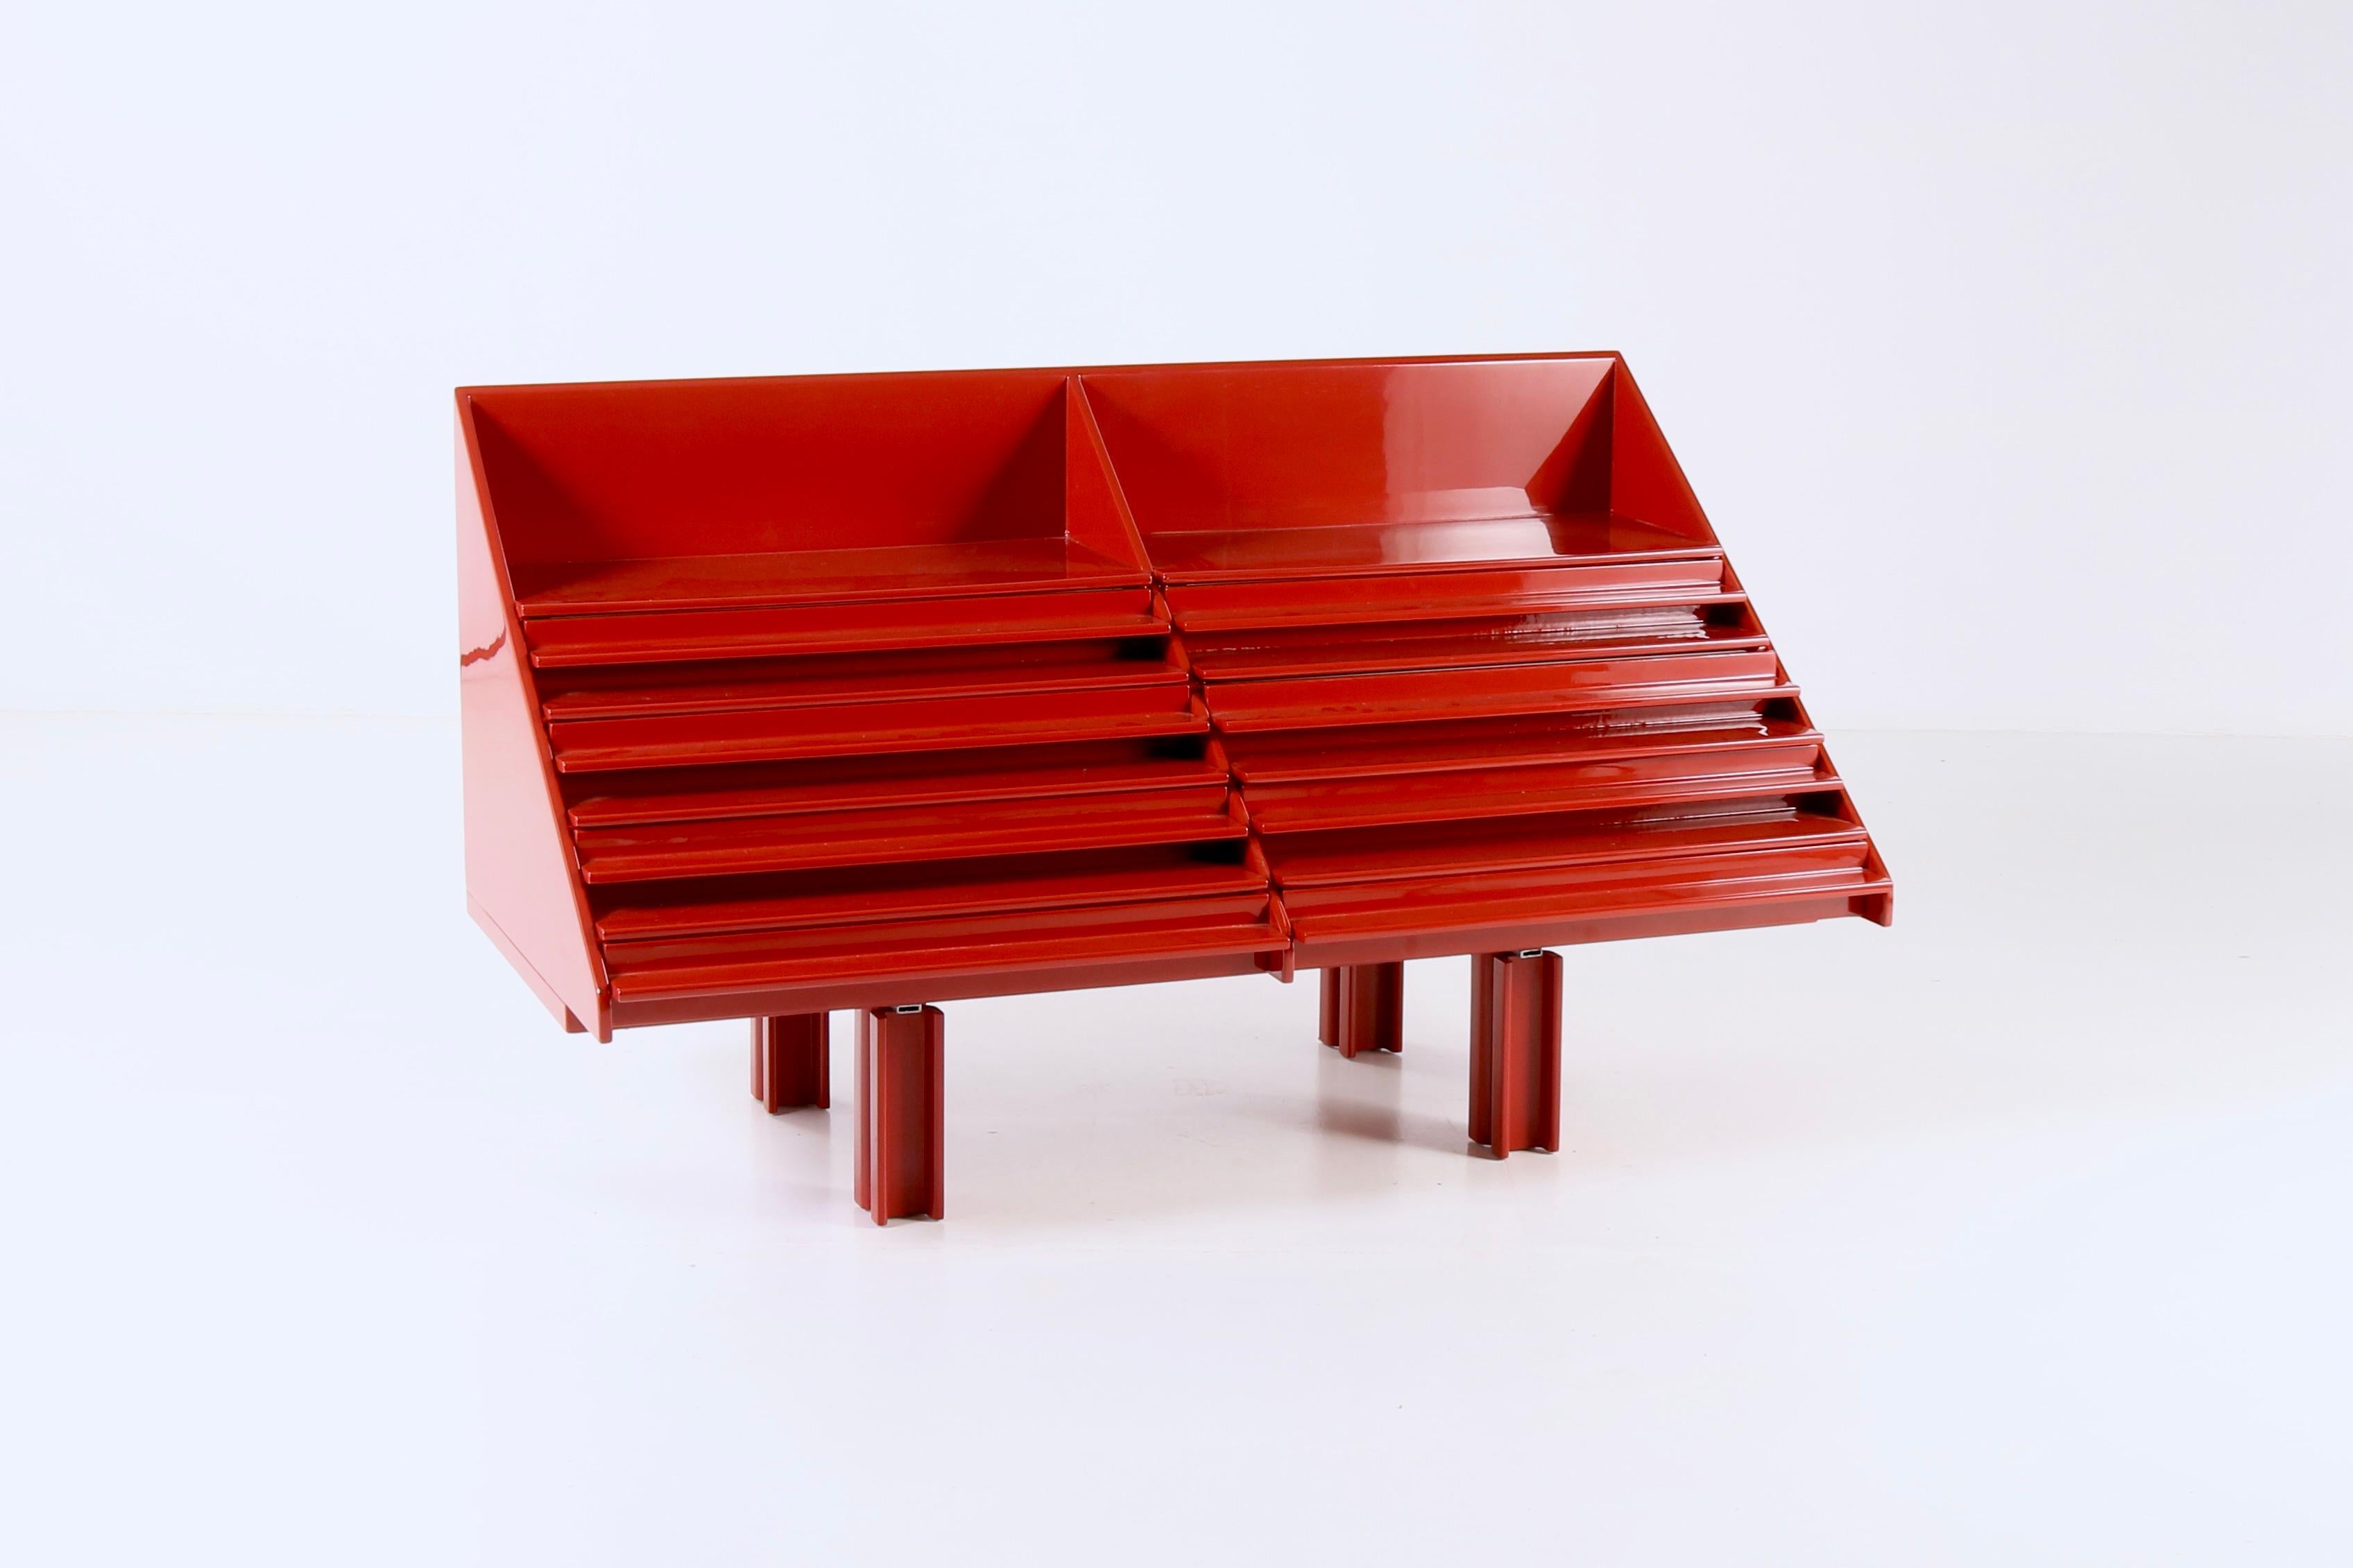 Indulge in timeless sophistication with this exquisite Saporiti's 1970s storage furniture with drawers. Its idiosyncratic shapes and vibrant tint in red makes it a iconic interior that can fit any refined space or ambience. It blends functional art